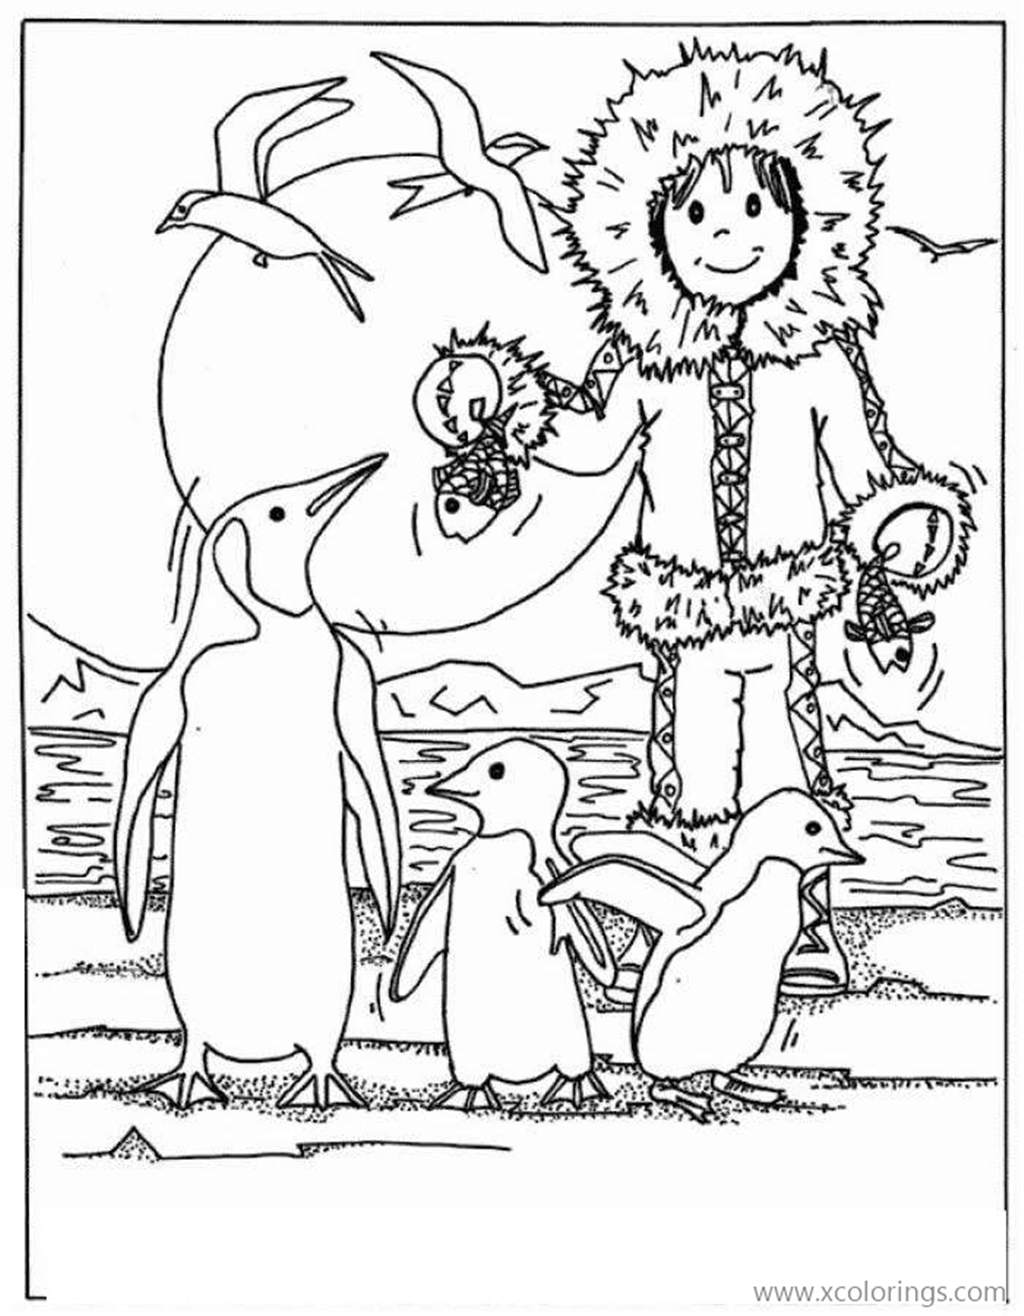 Free Eskimo with Penguin Coloring Pages printable